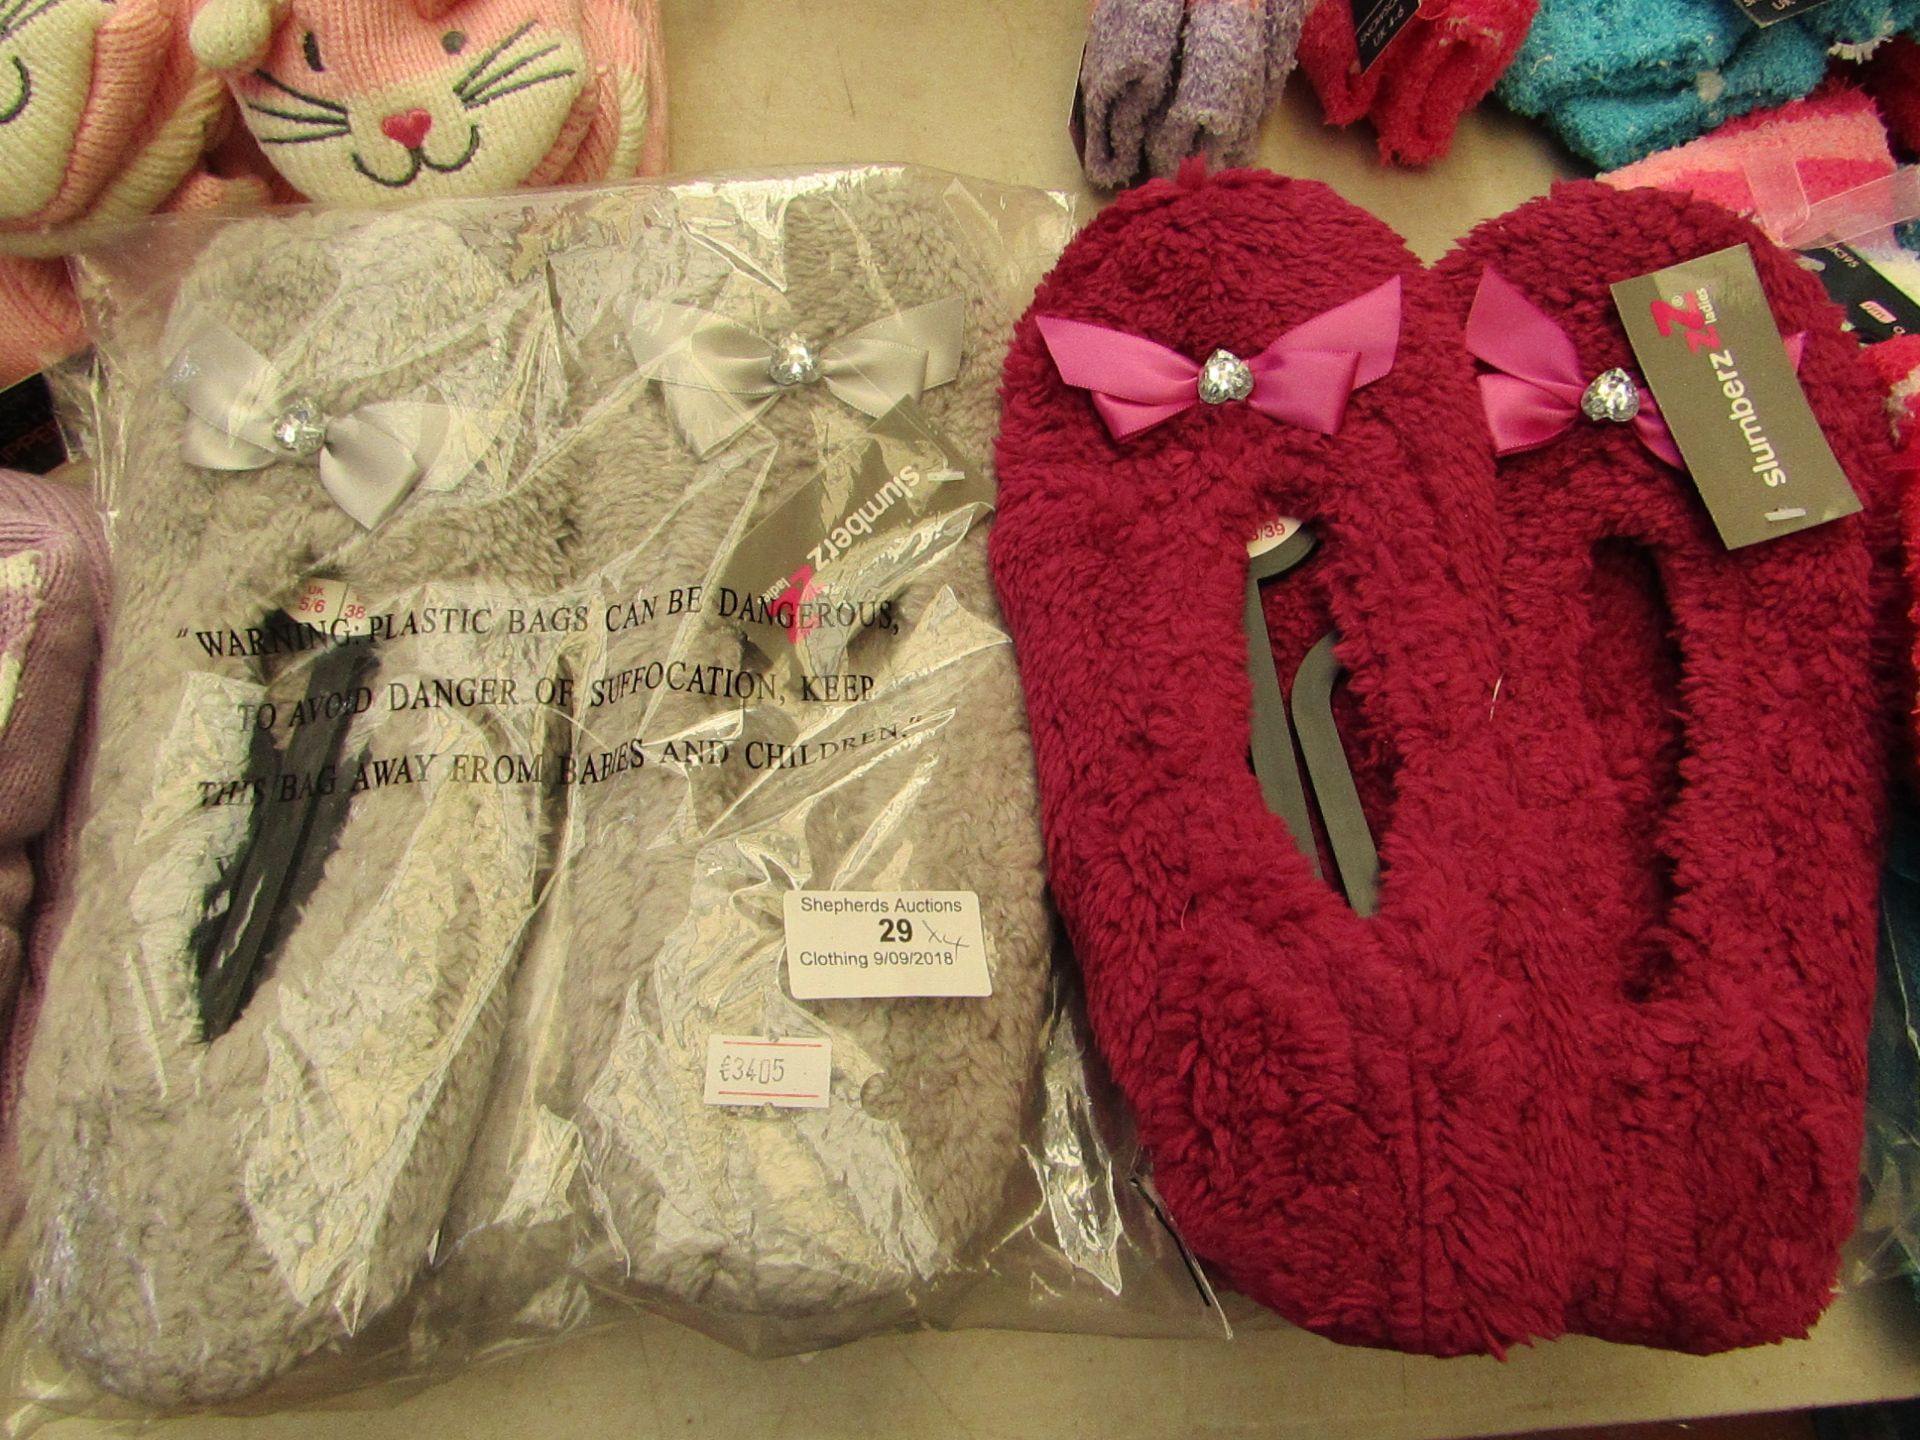 4 X Slumberz Ladies slippers 3 are size 7-8 the other is size 5-6 all new in packaging